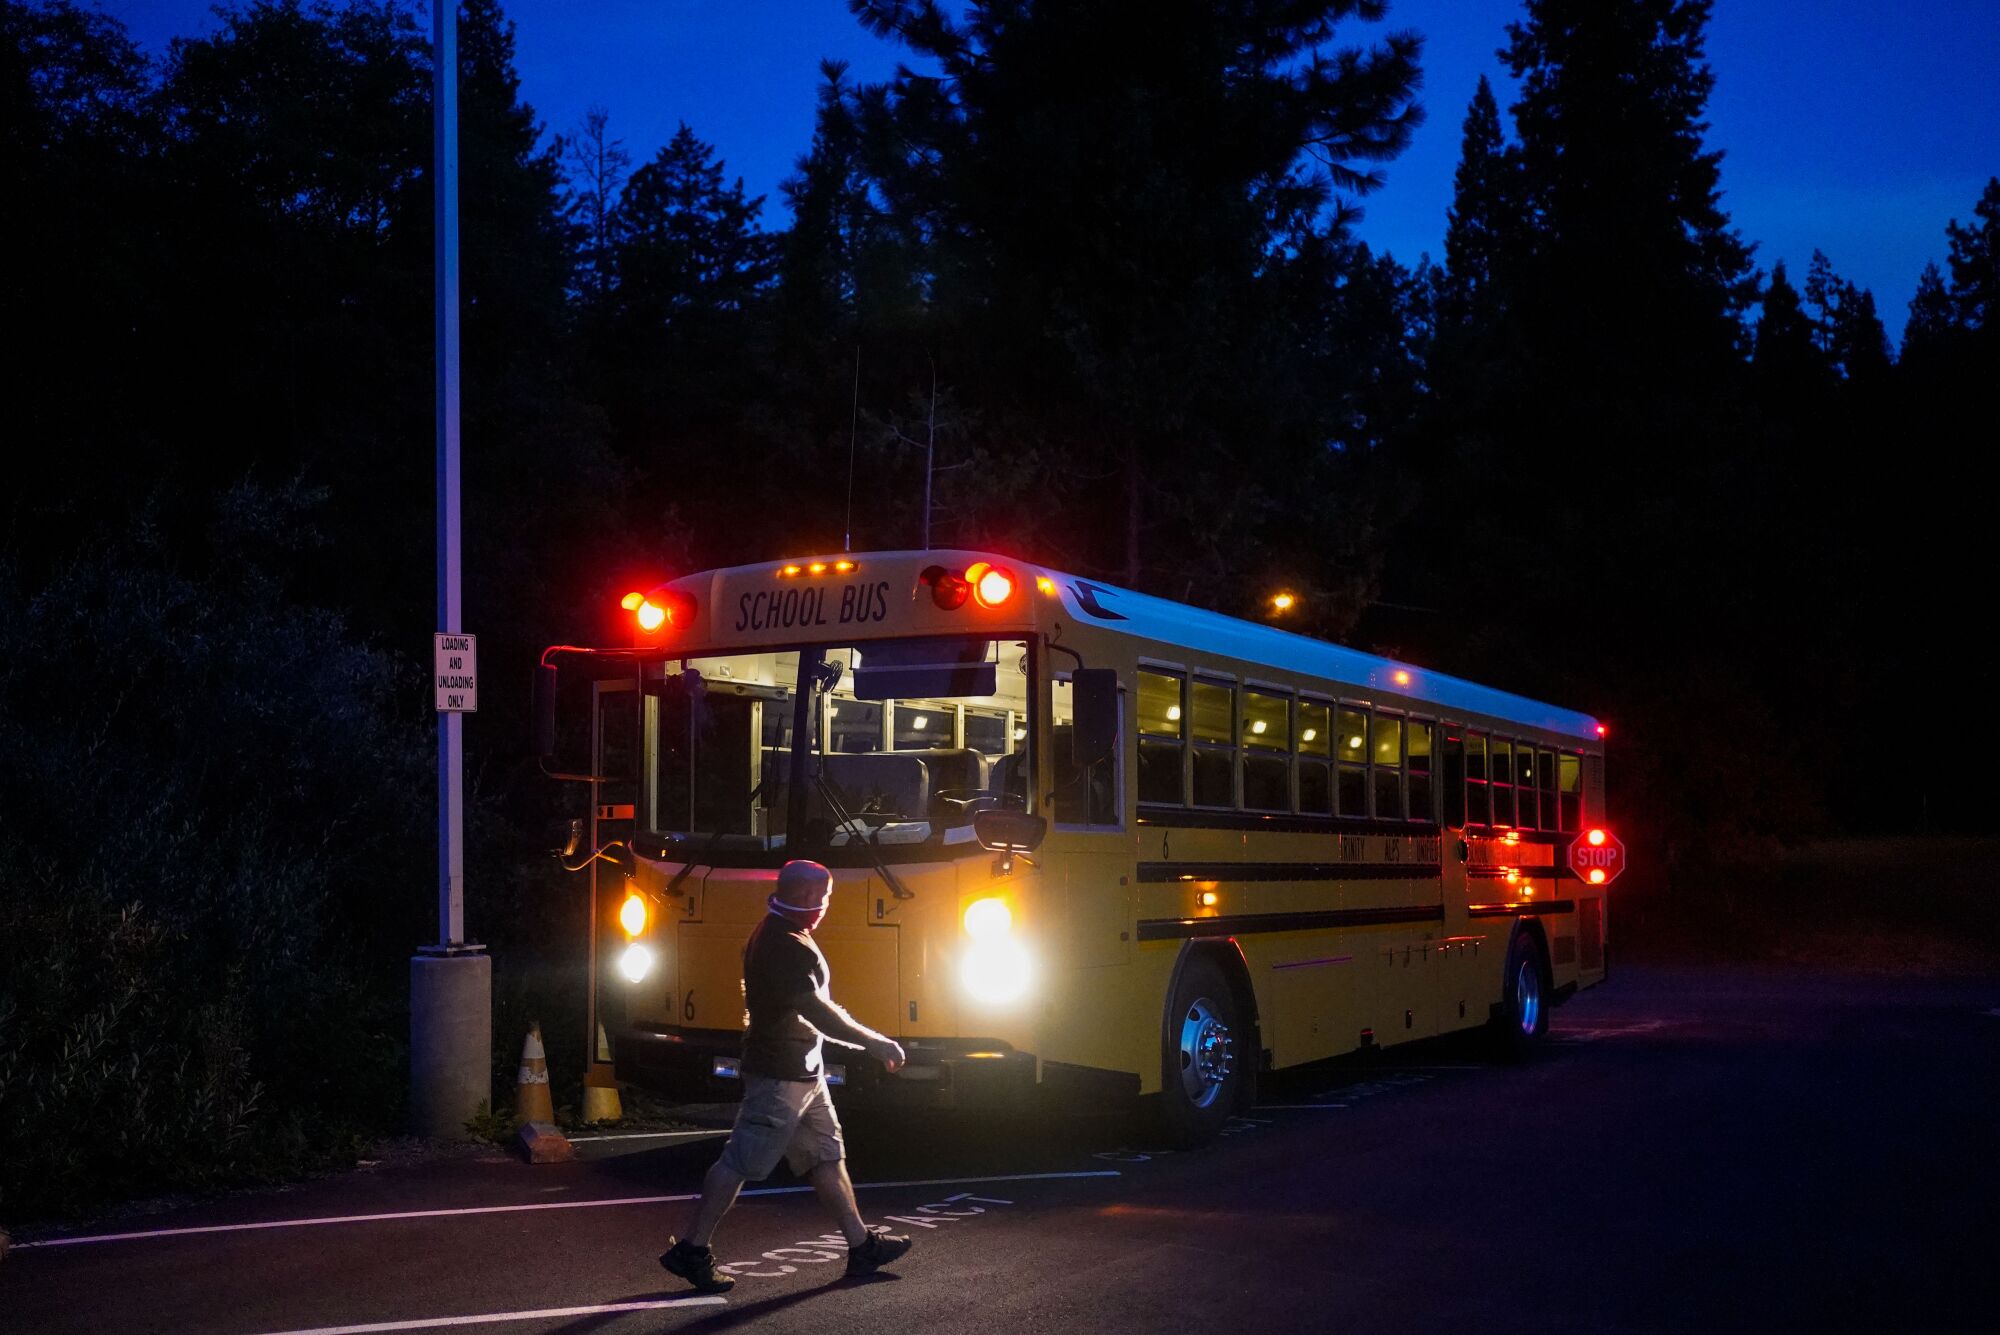 Carl Tereece inspects his bus before starting his route at Burnt Ranch Elementary in Burnt Ranch.